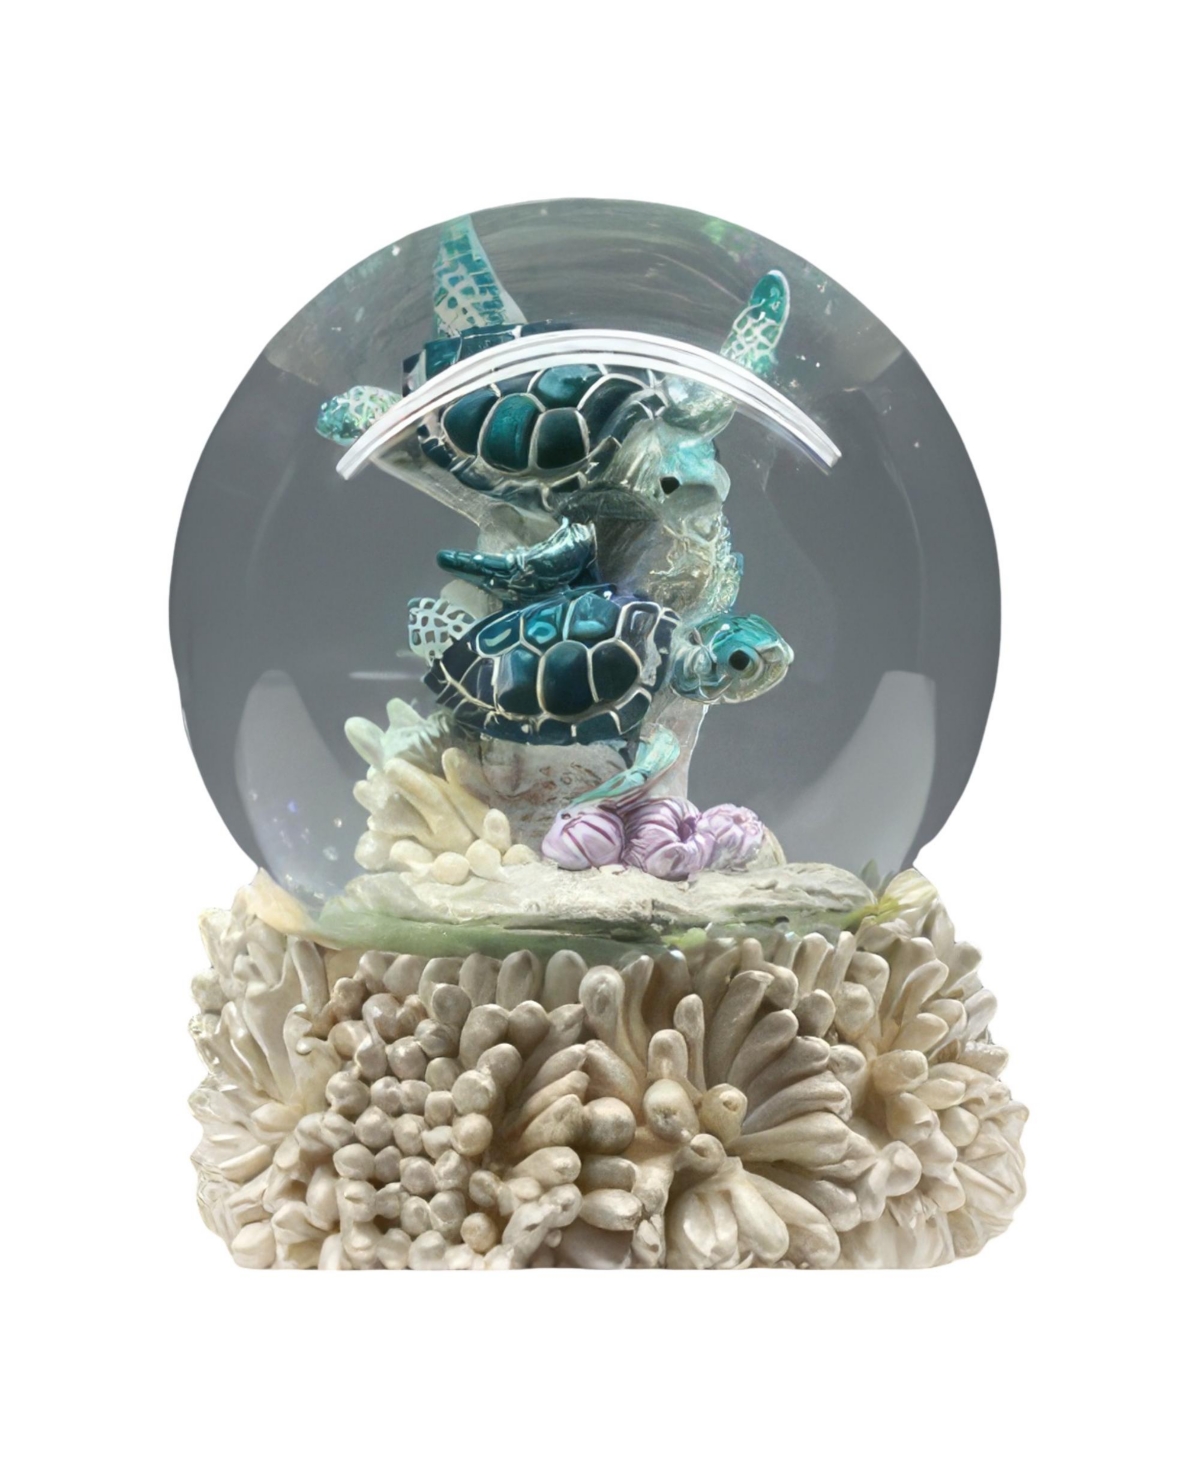 3.25"H Sea Turtle Snow Globe Home Decor Perfect Gift for House Warming, Holidays and Birthdays - Multicolor